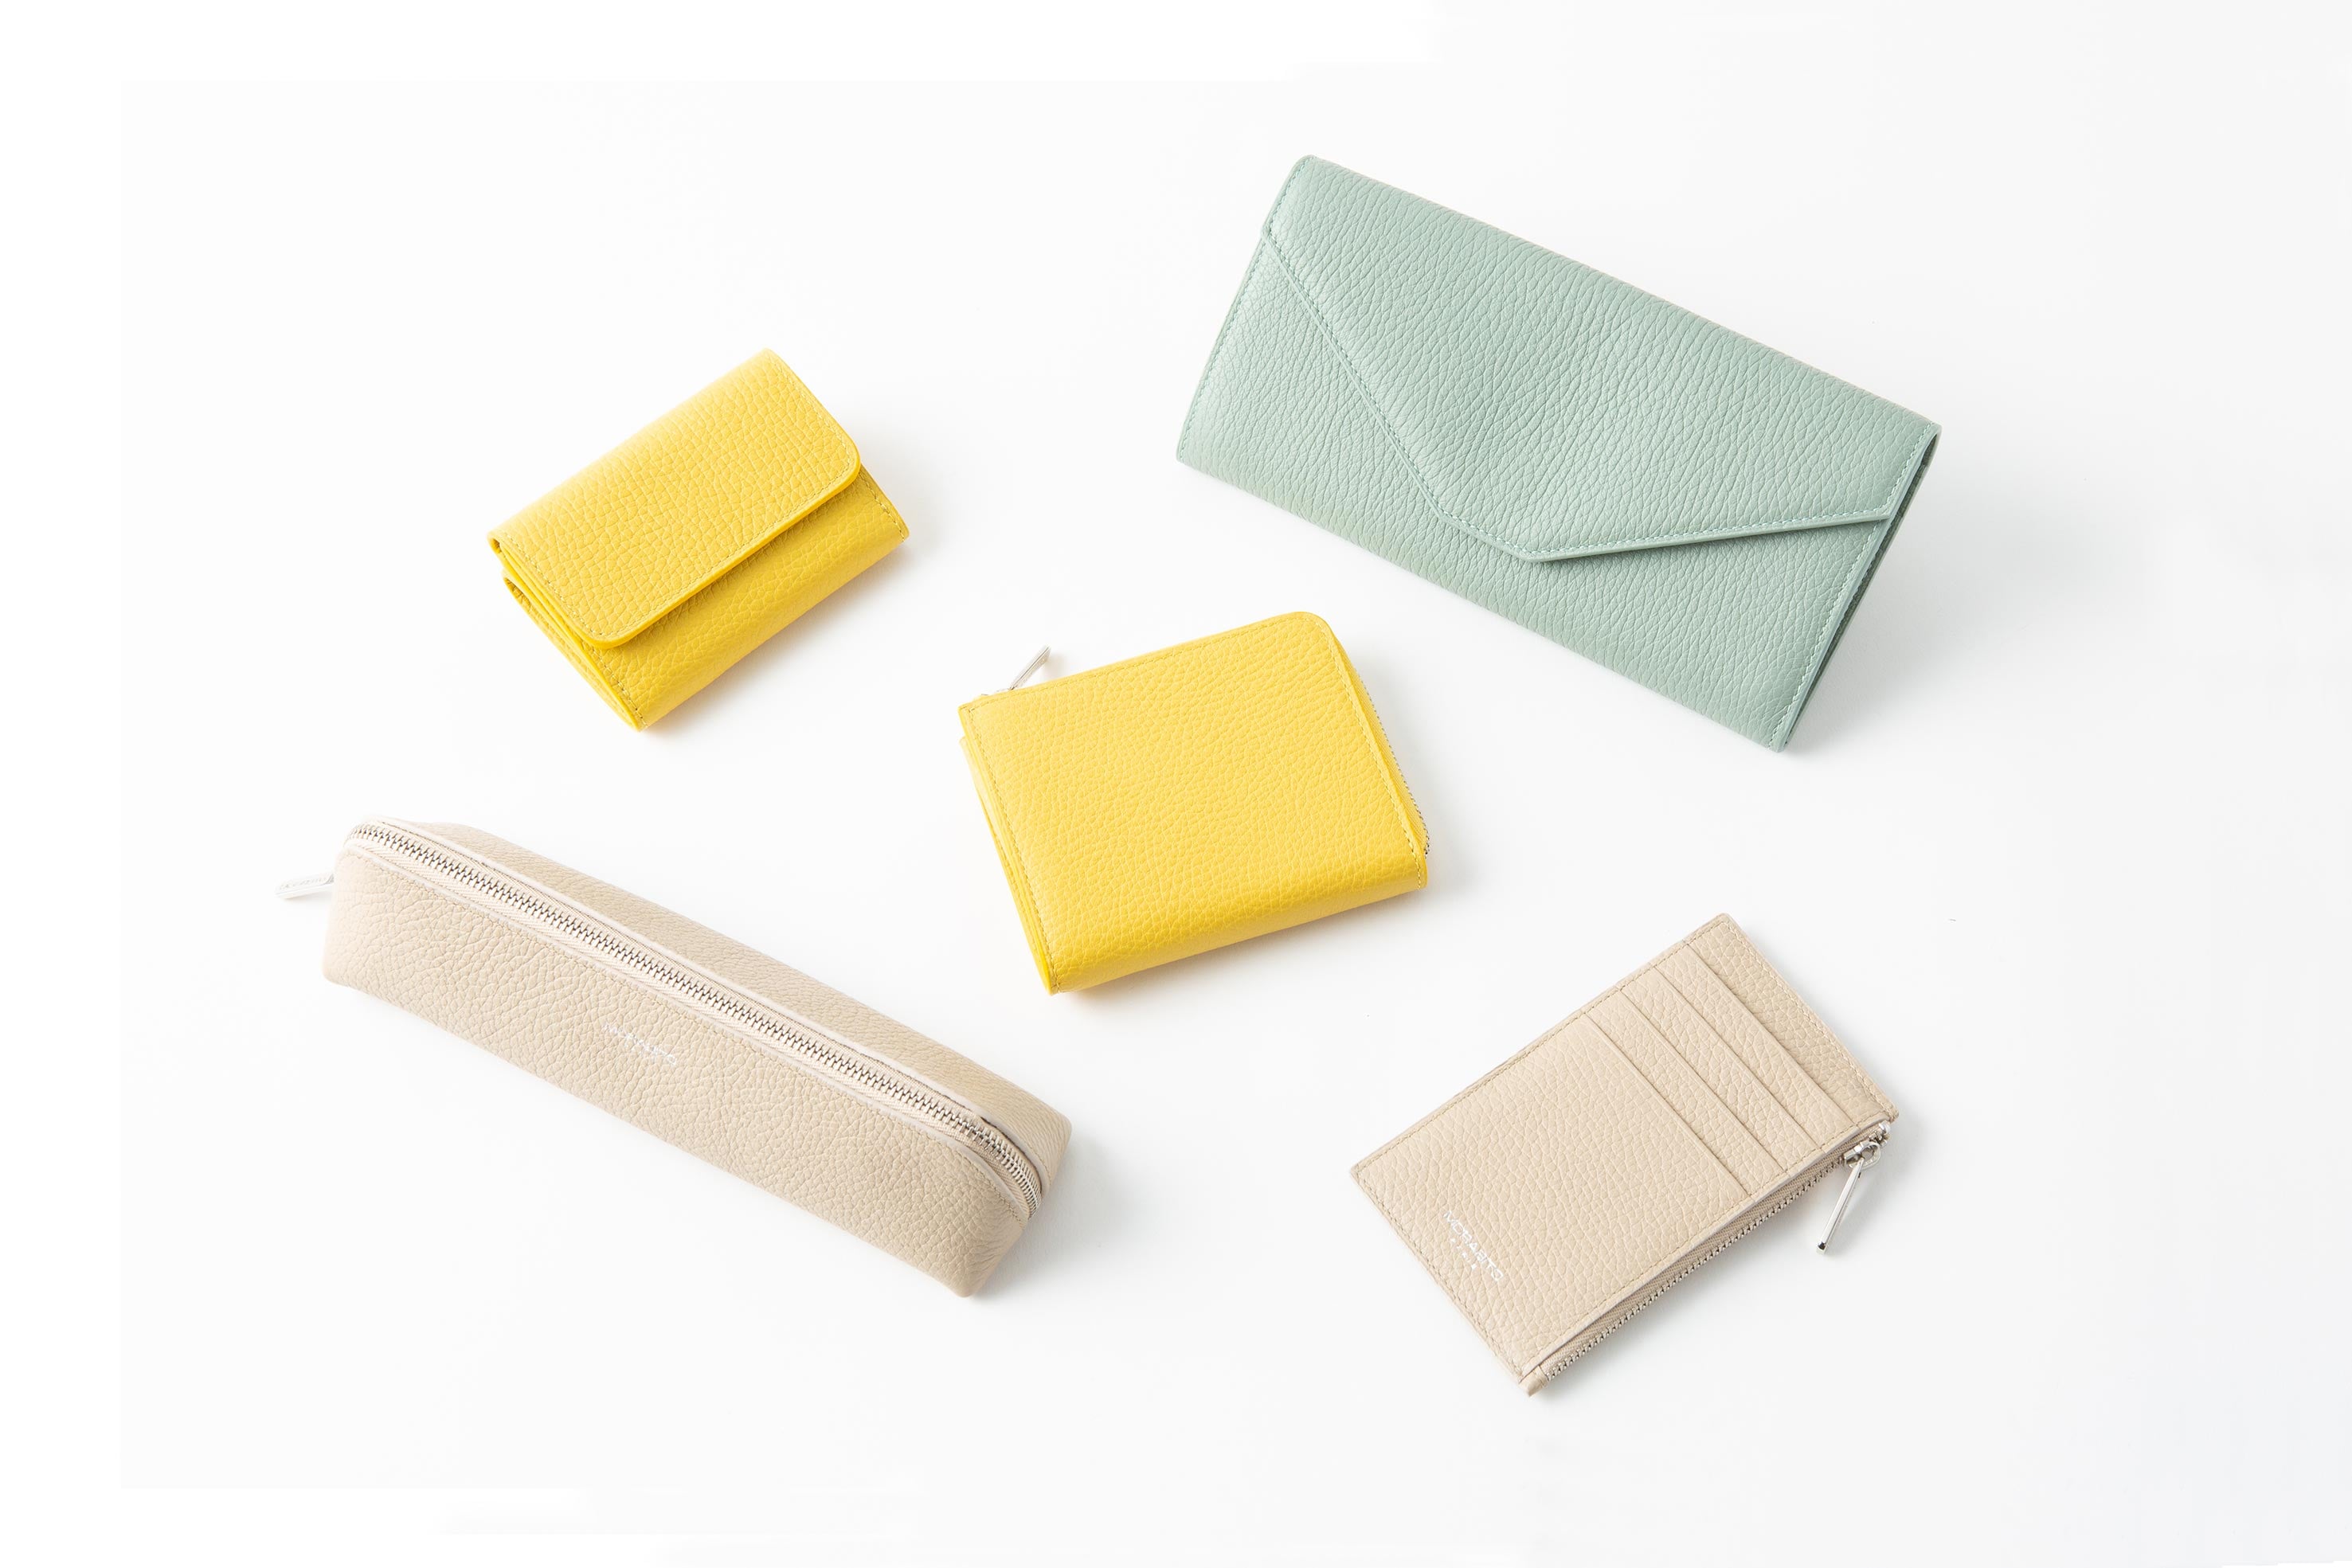 NEW Small Leather Goods